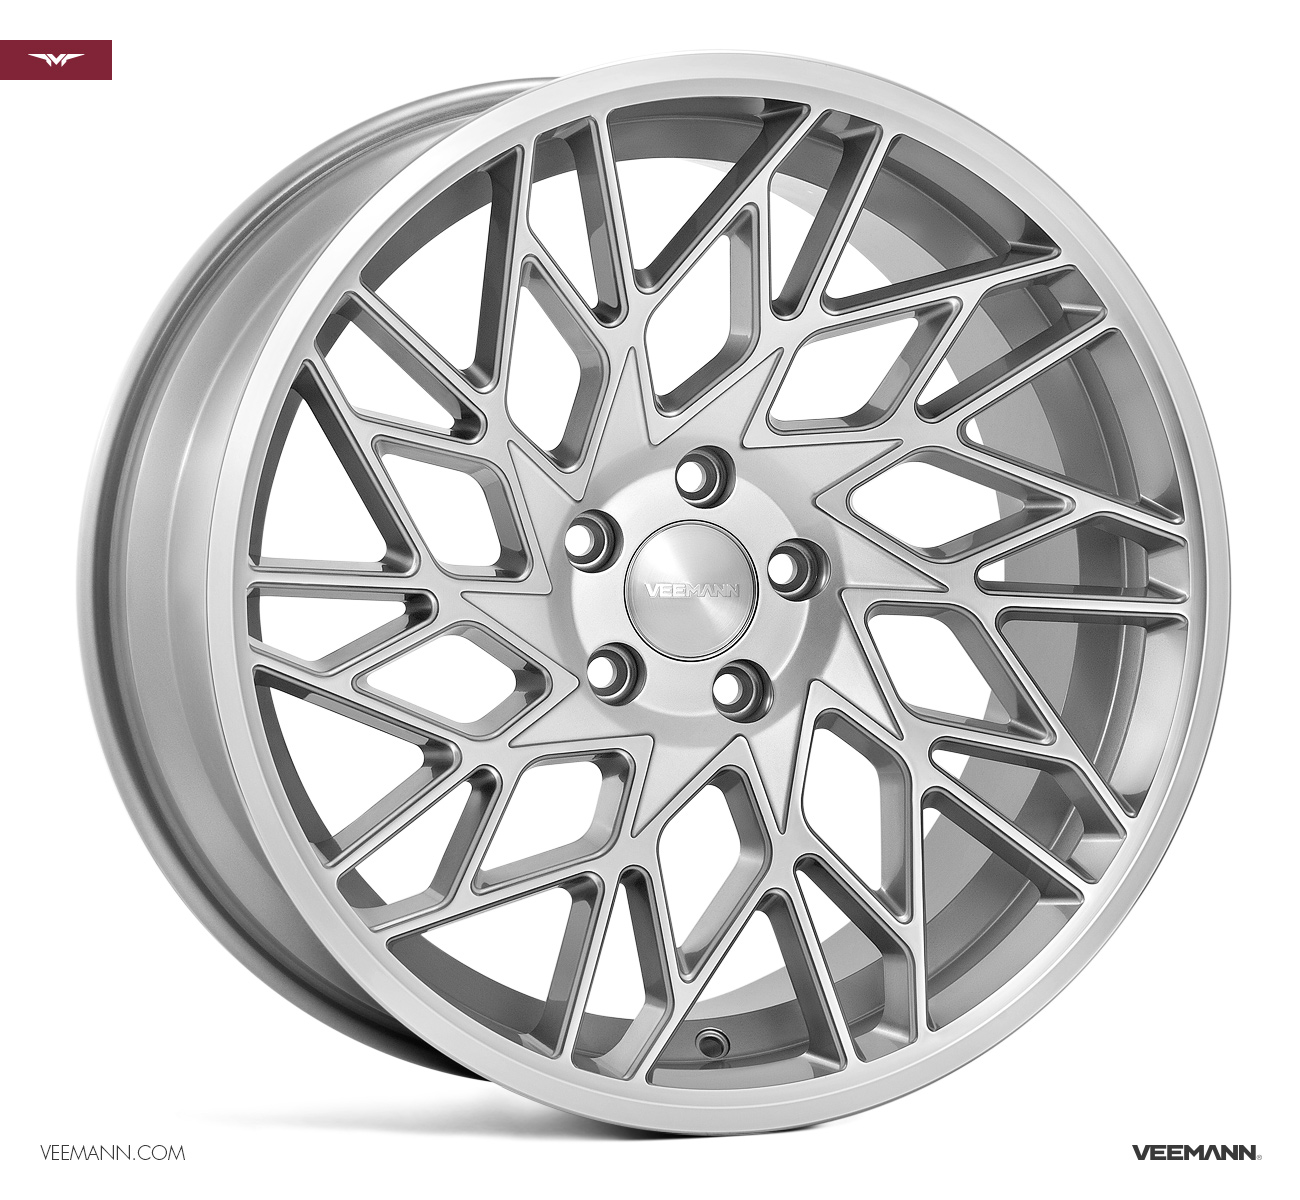 NEW 19  VEEMANN V FS29R ALLOYS IN SILVER POL WITH WIDER 9 5  REARS